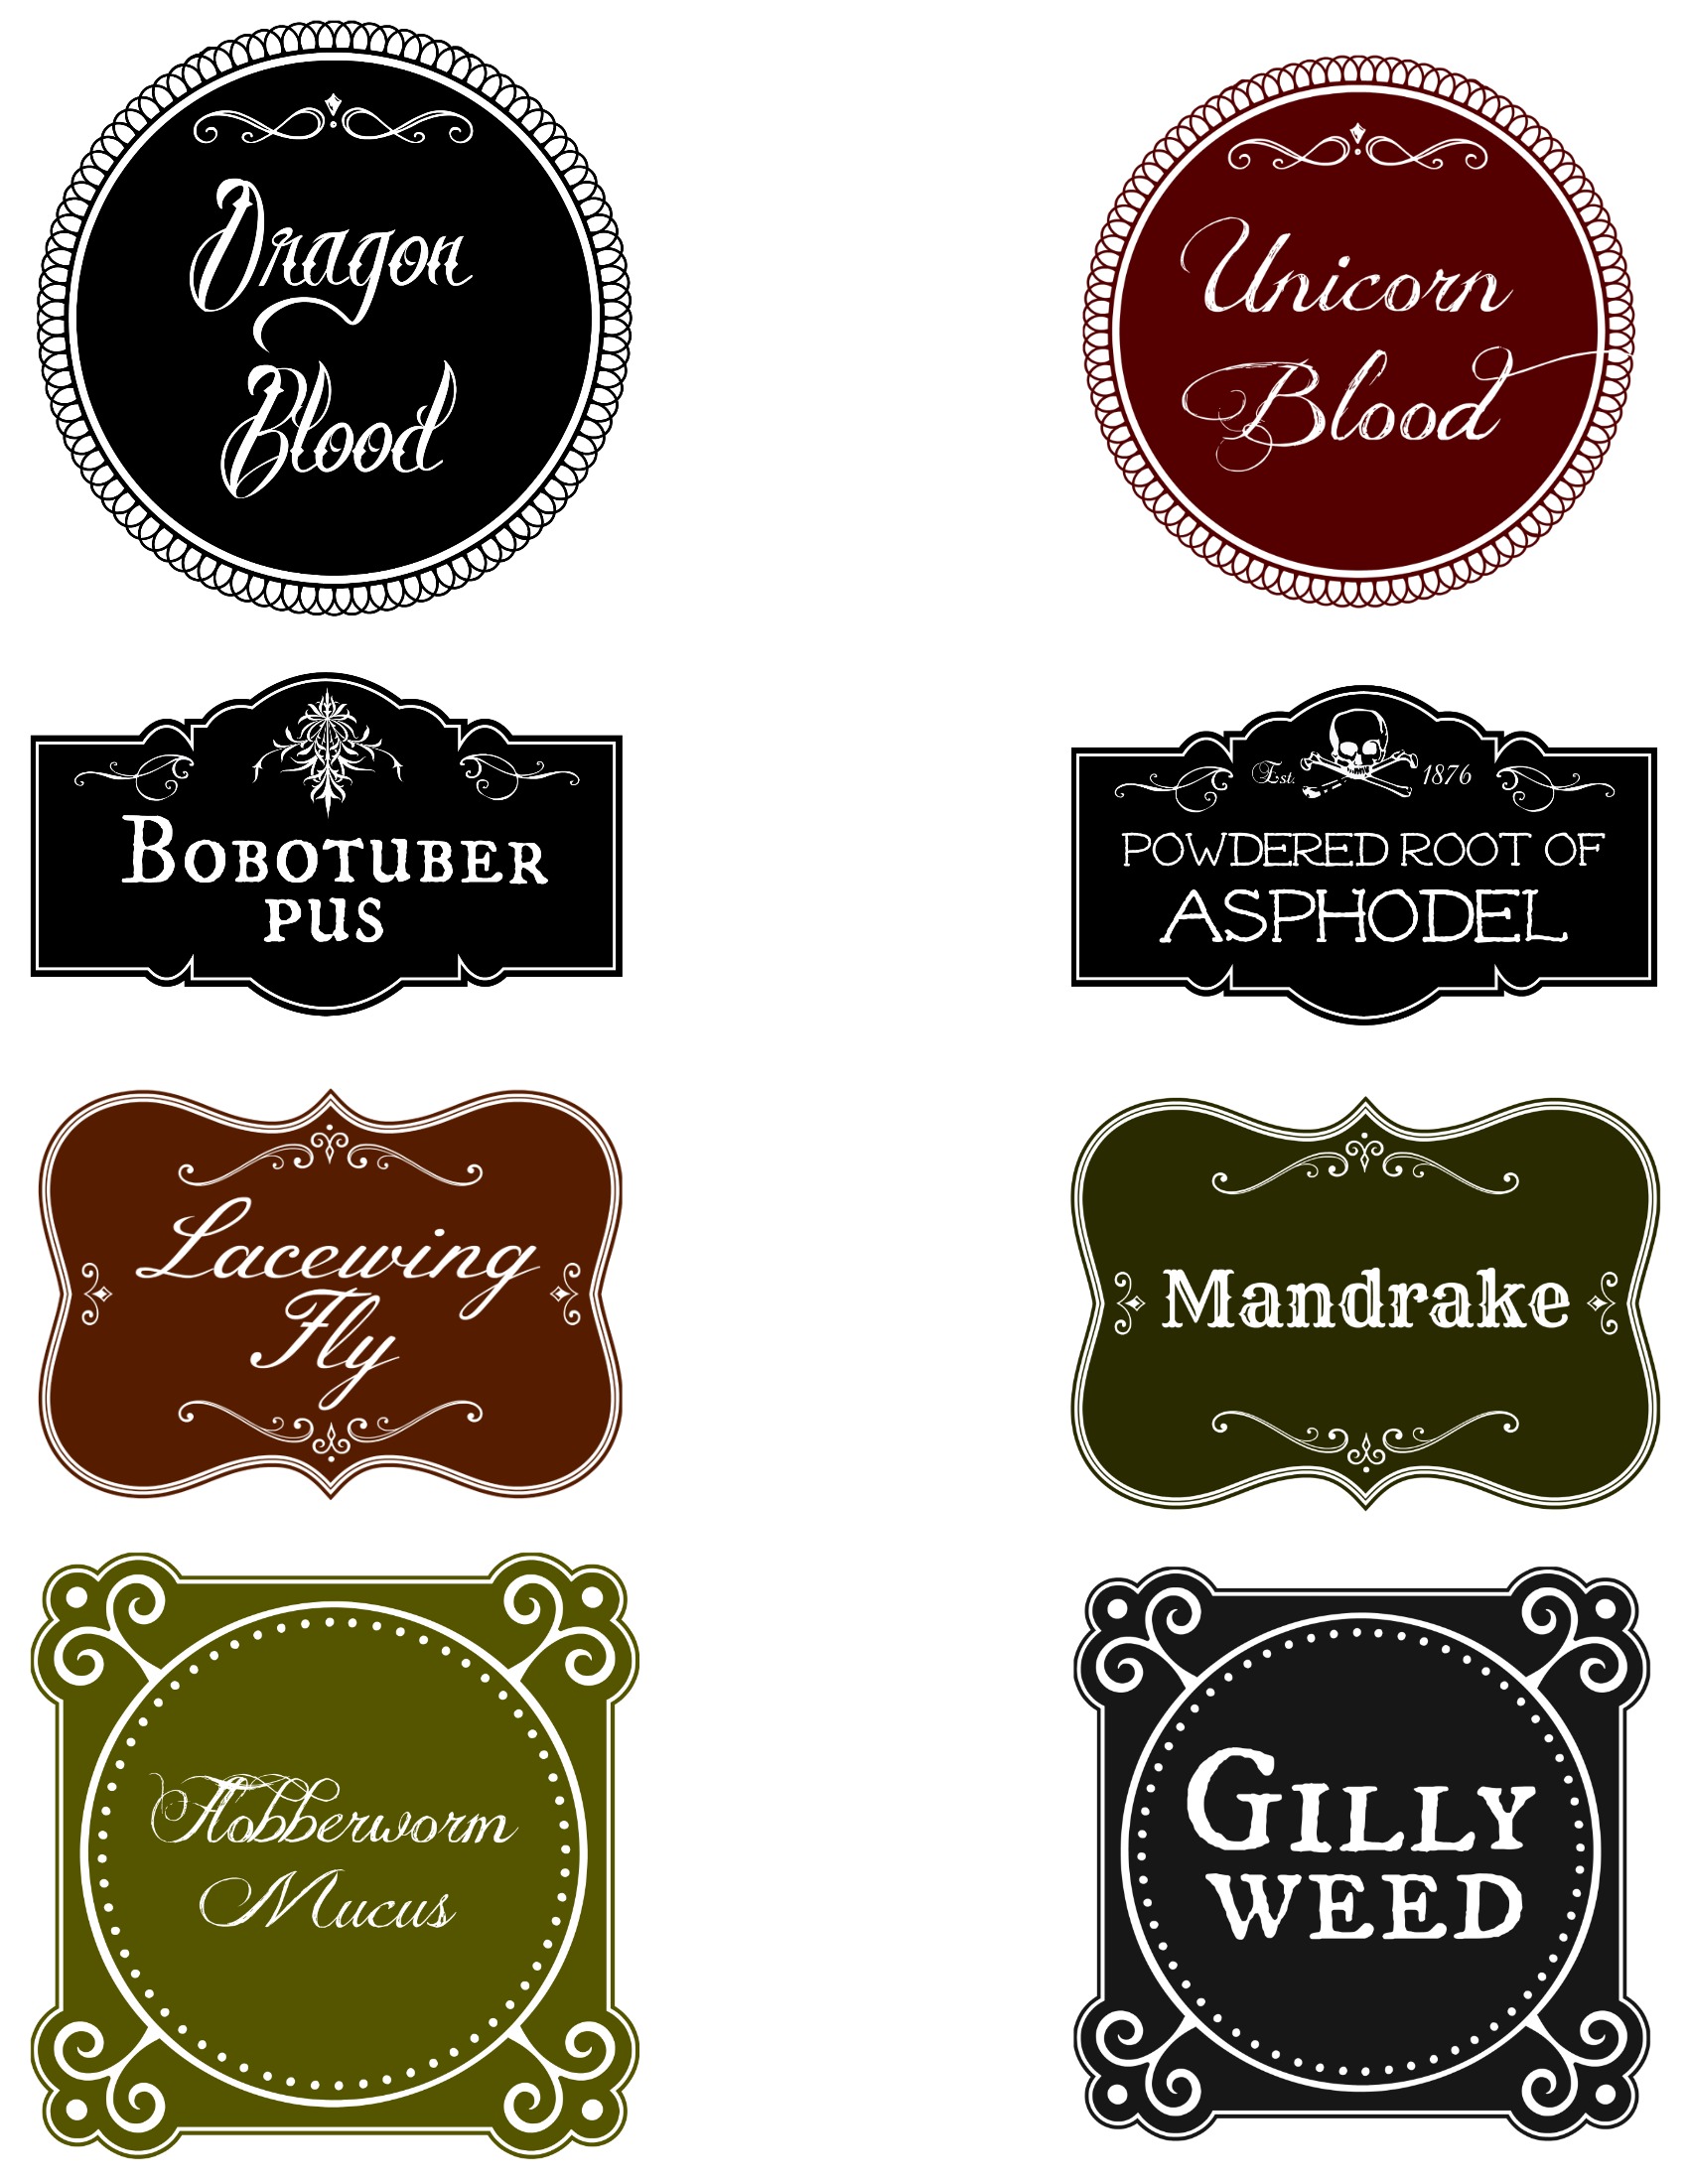 The printable labels for the jars.